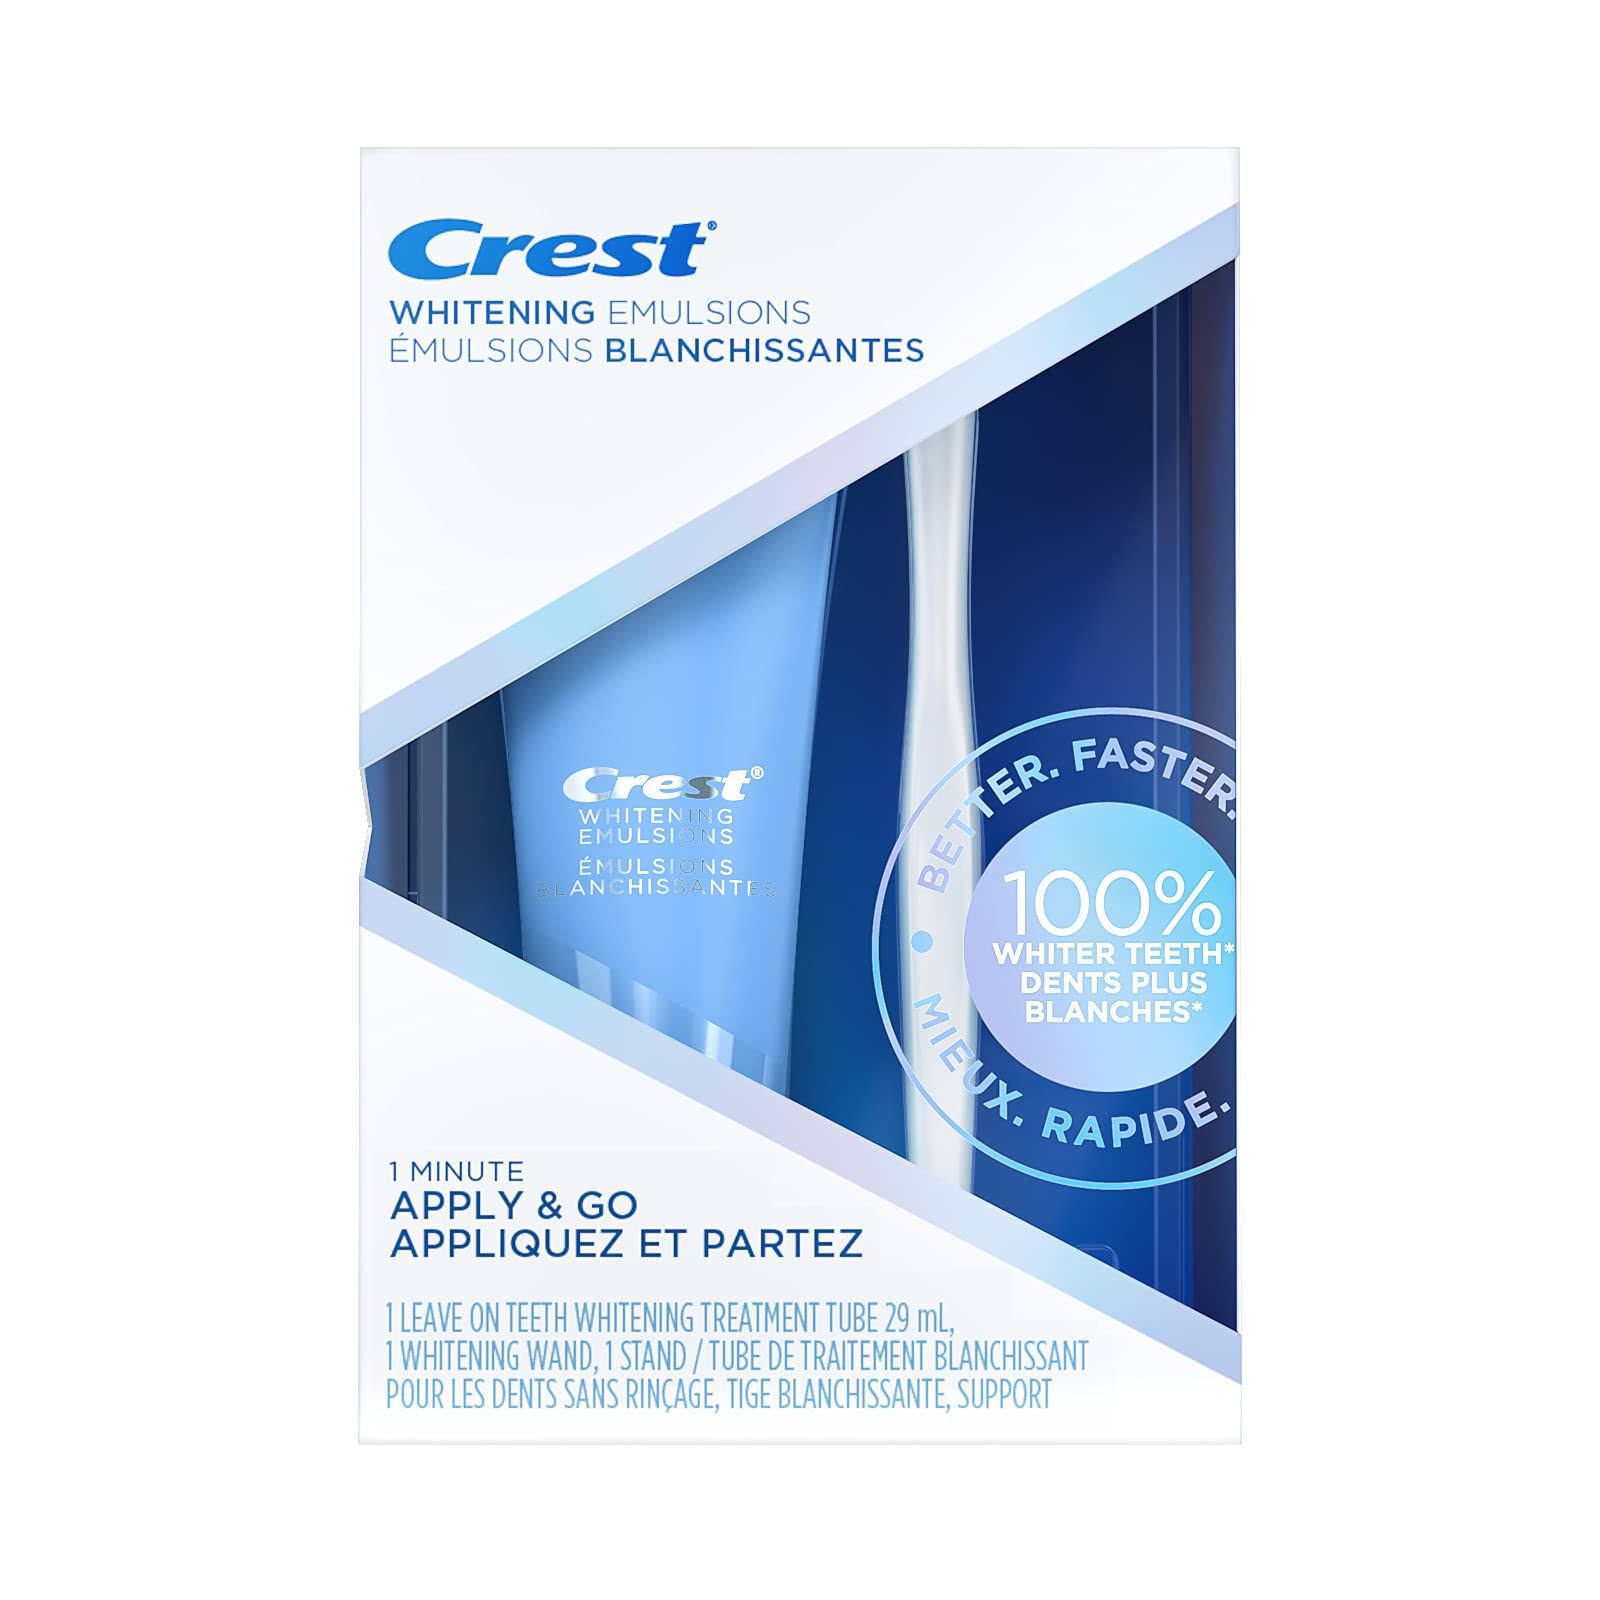 Crest Whitening Emulsions With Wand Applicator, Apply & Go Teeth Whitening